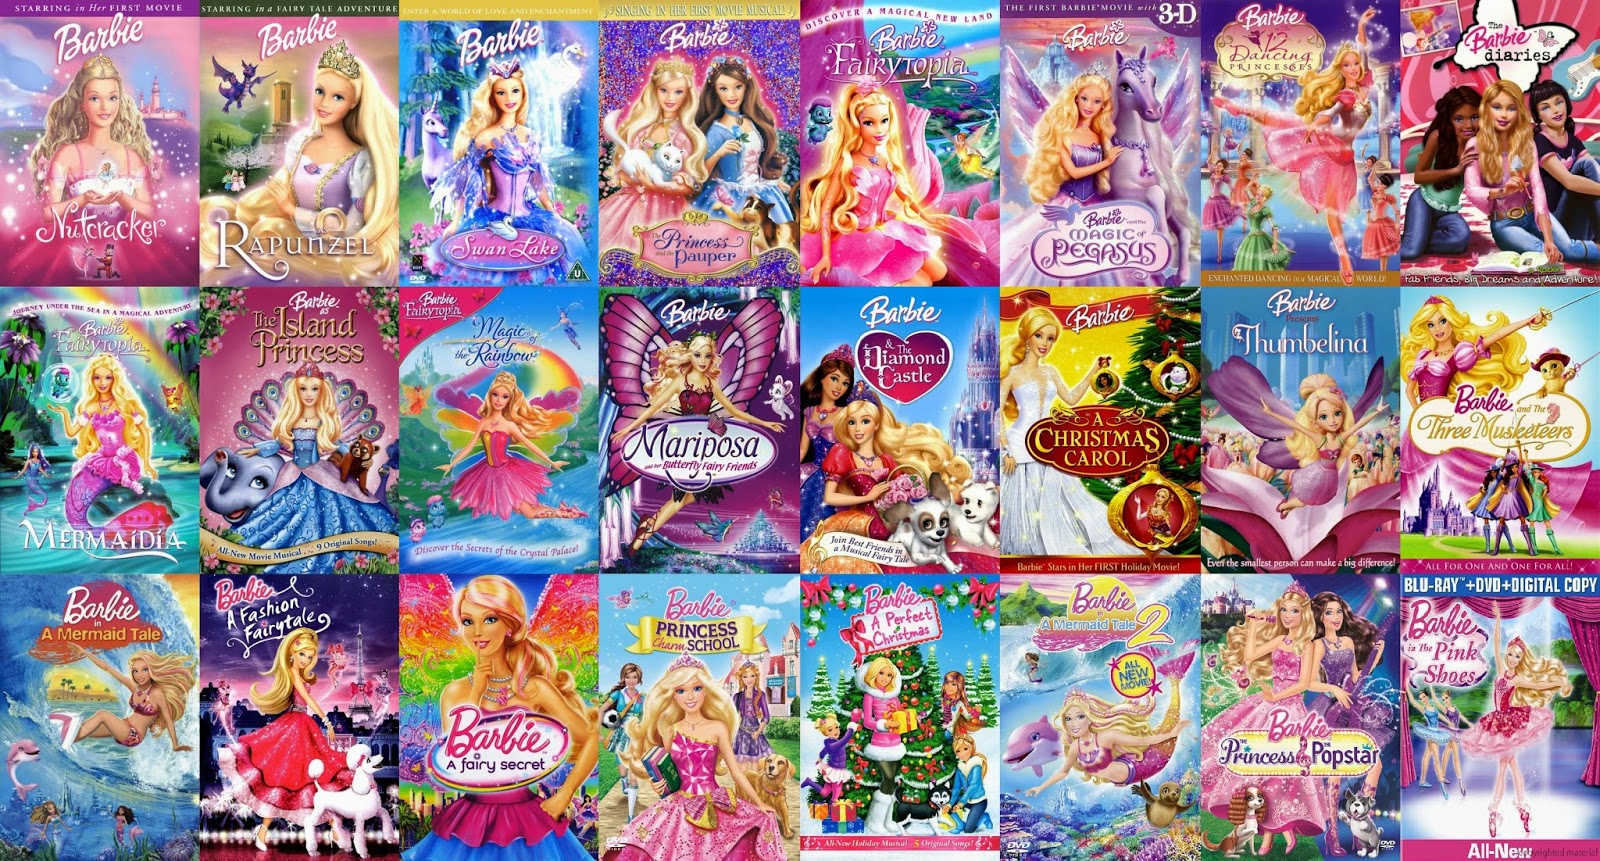 Never too old for Dolls: Barbie movies!